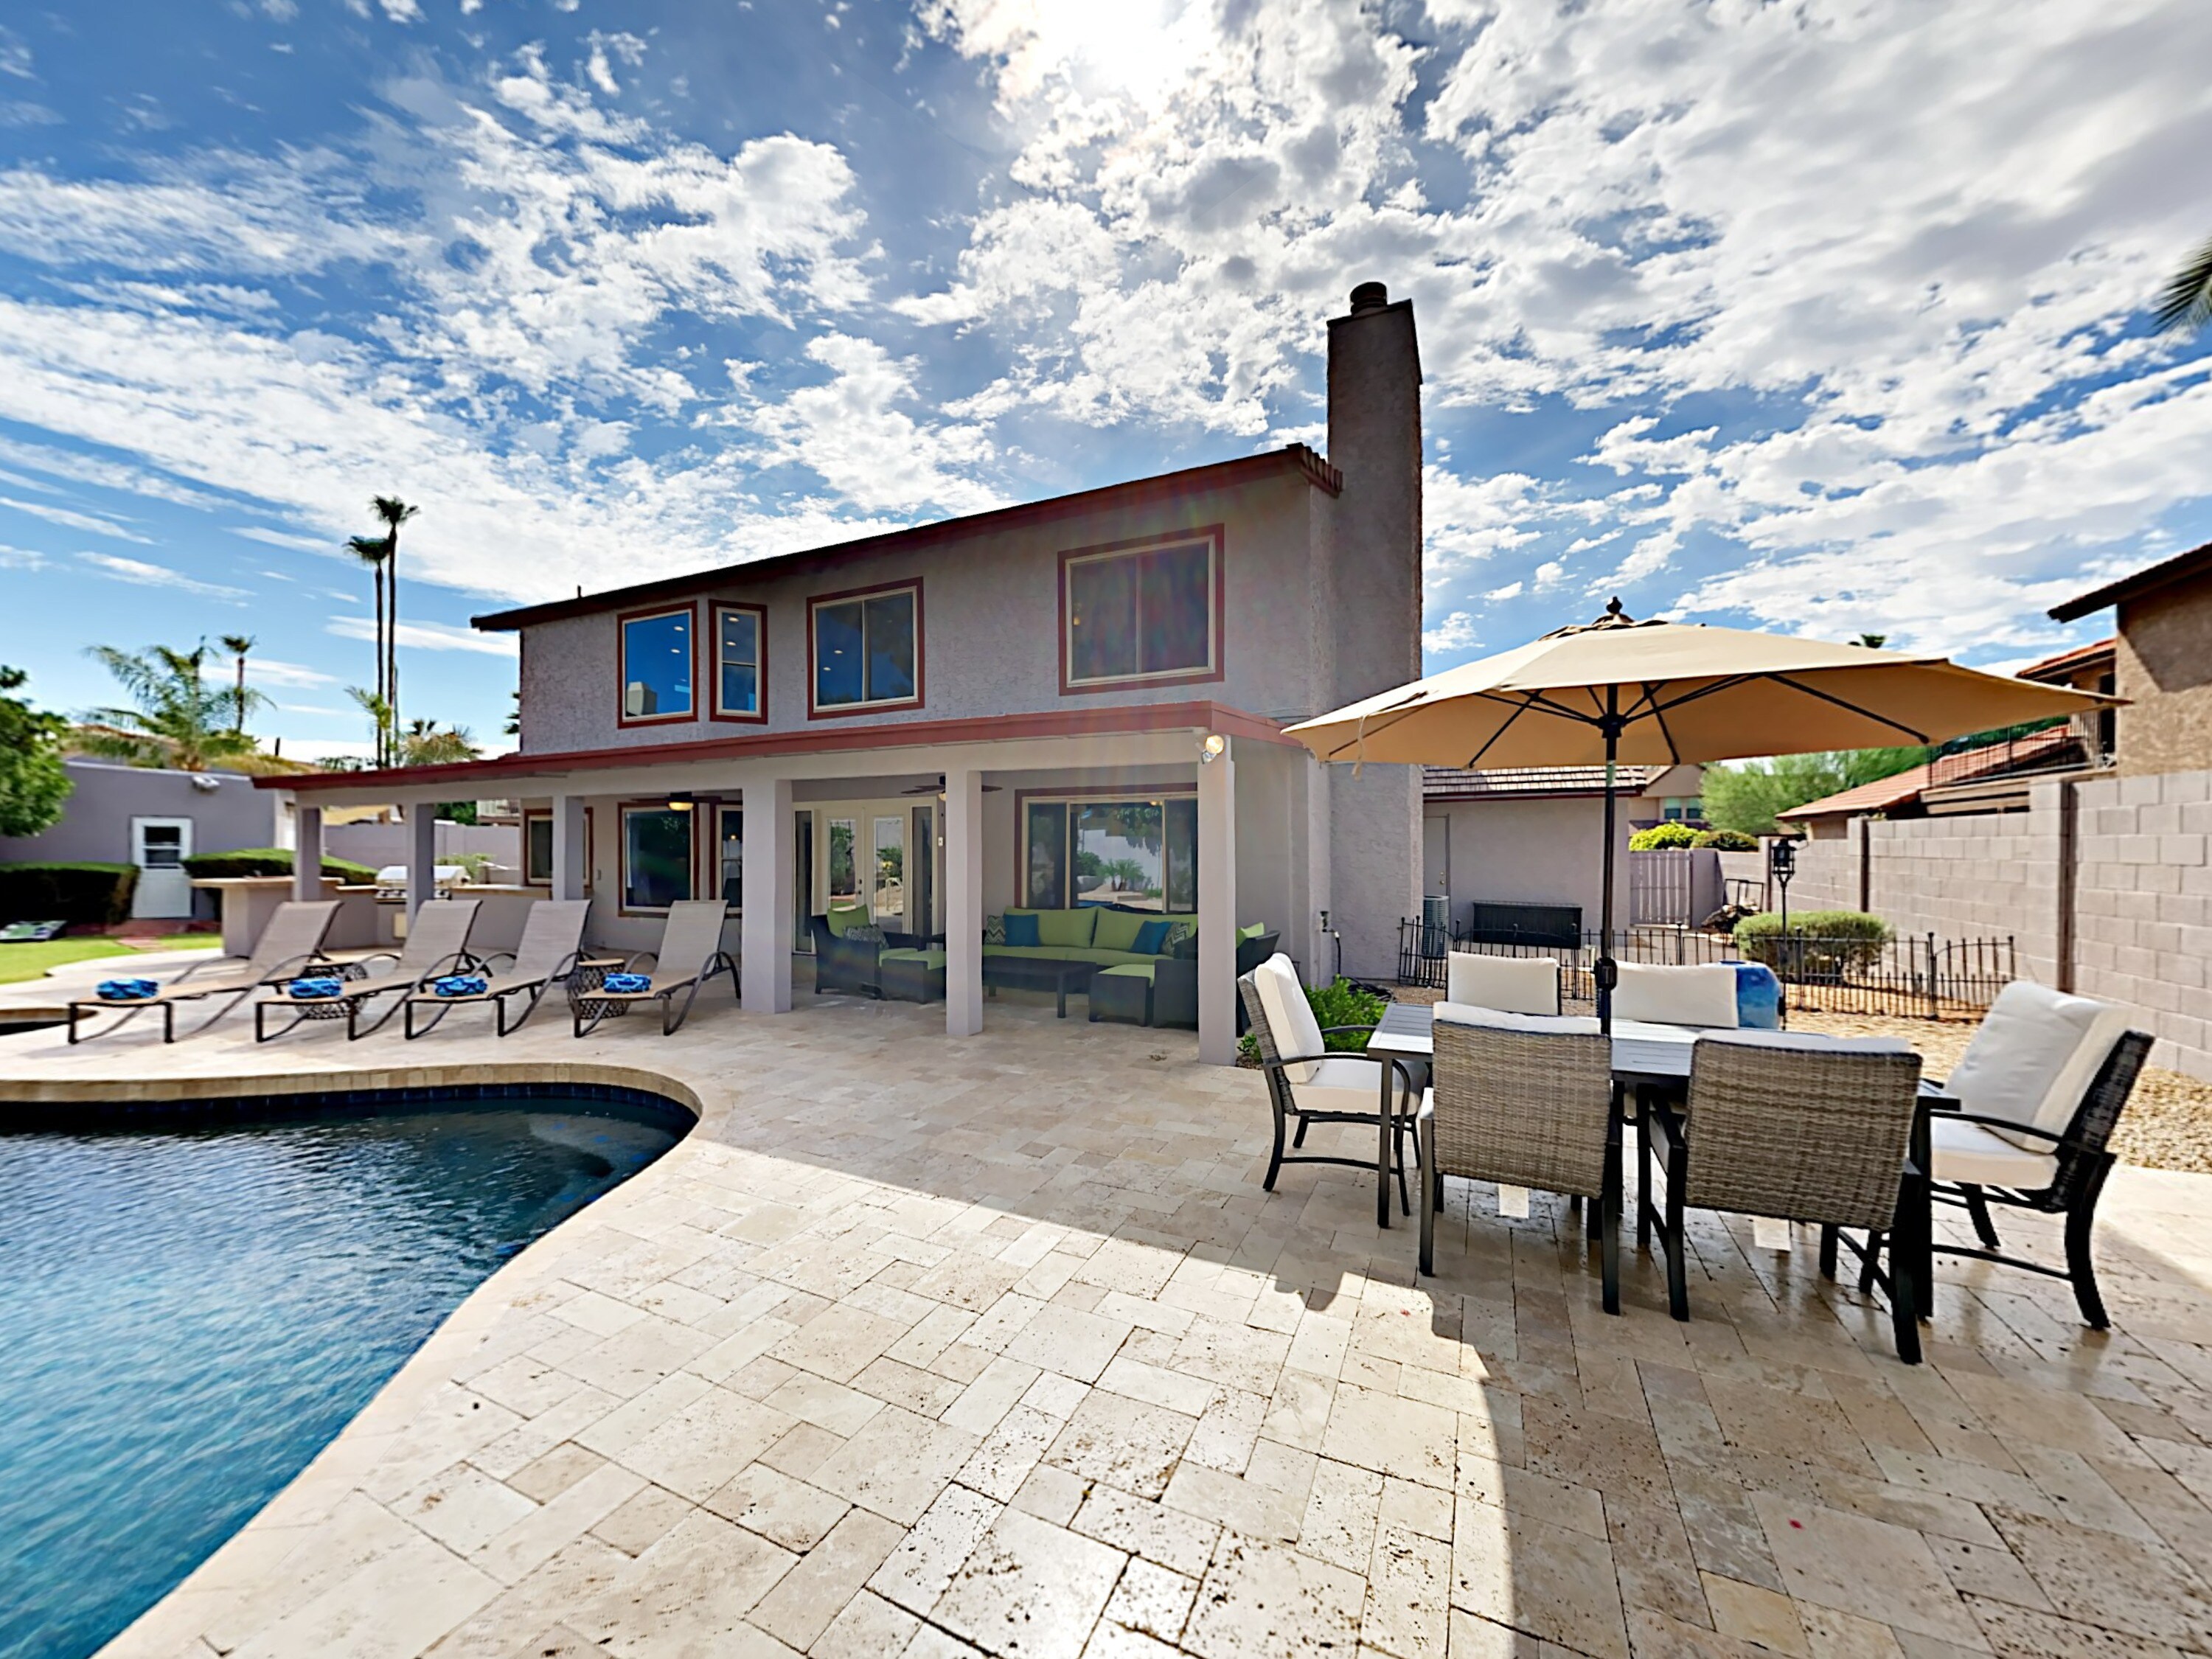 Spend sunny days in your backyard oasis on the pool deck.